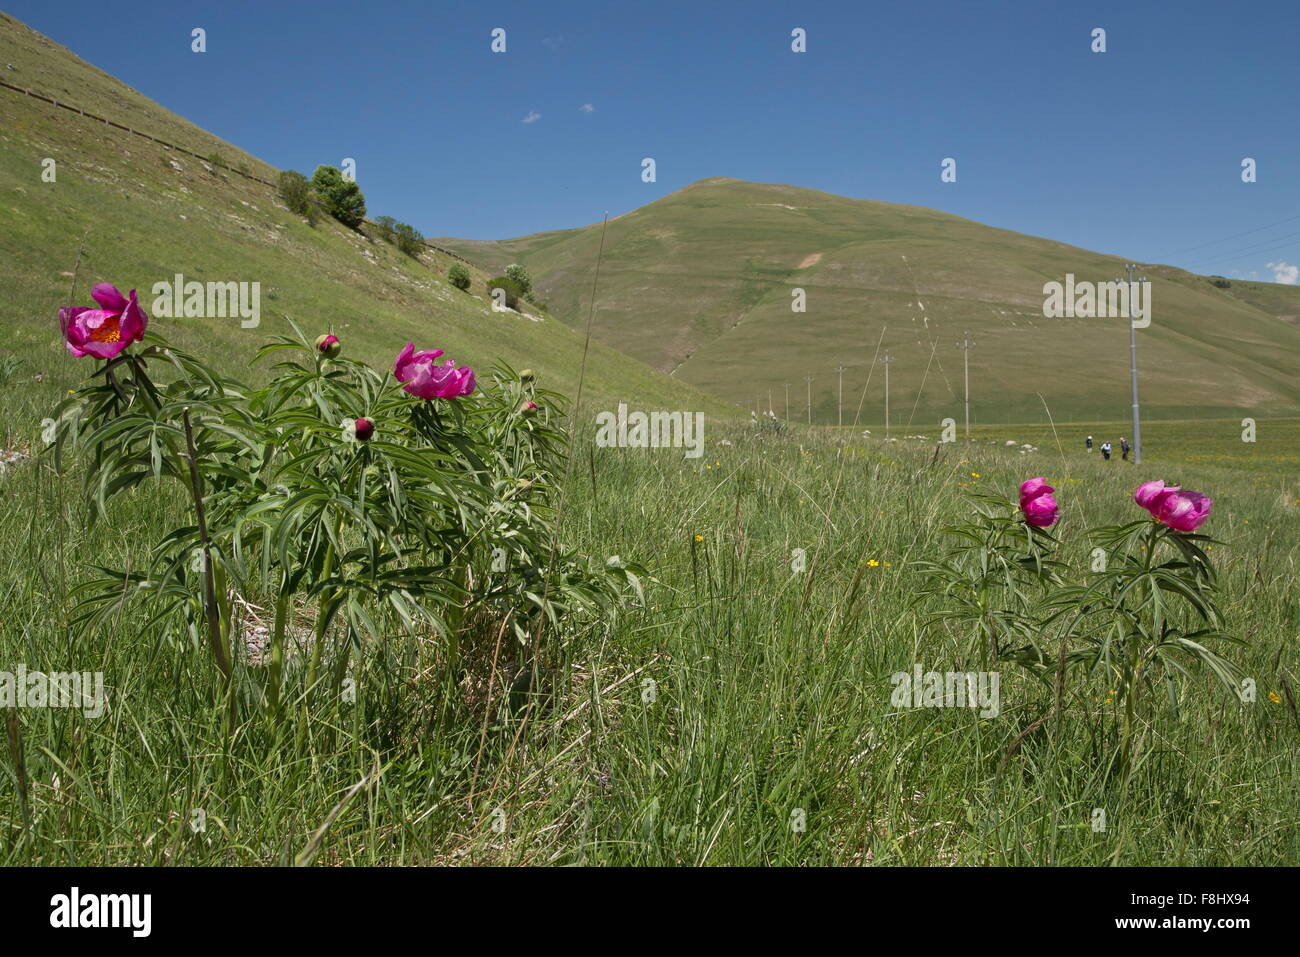 Common peony, Paeonia officinalis in flower on Piano Grande, in the Monti Sibillini National Park, Apennines, Italy. Stock Photo